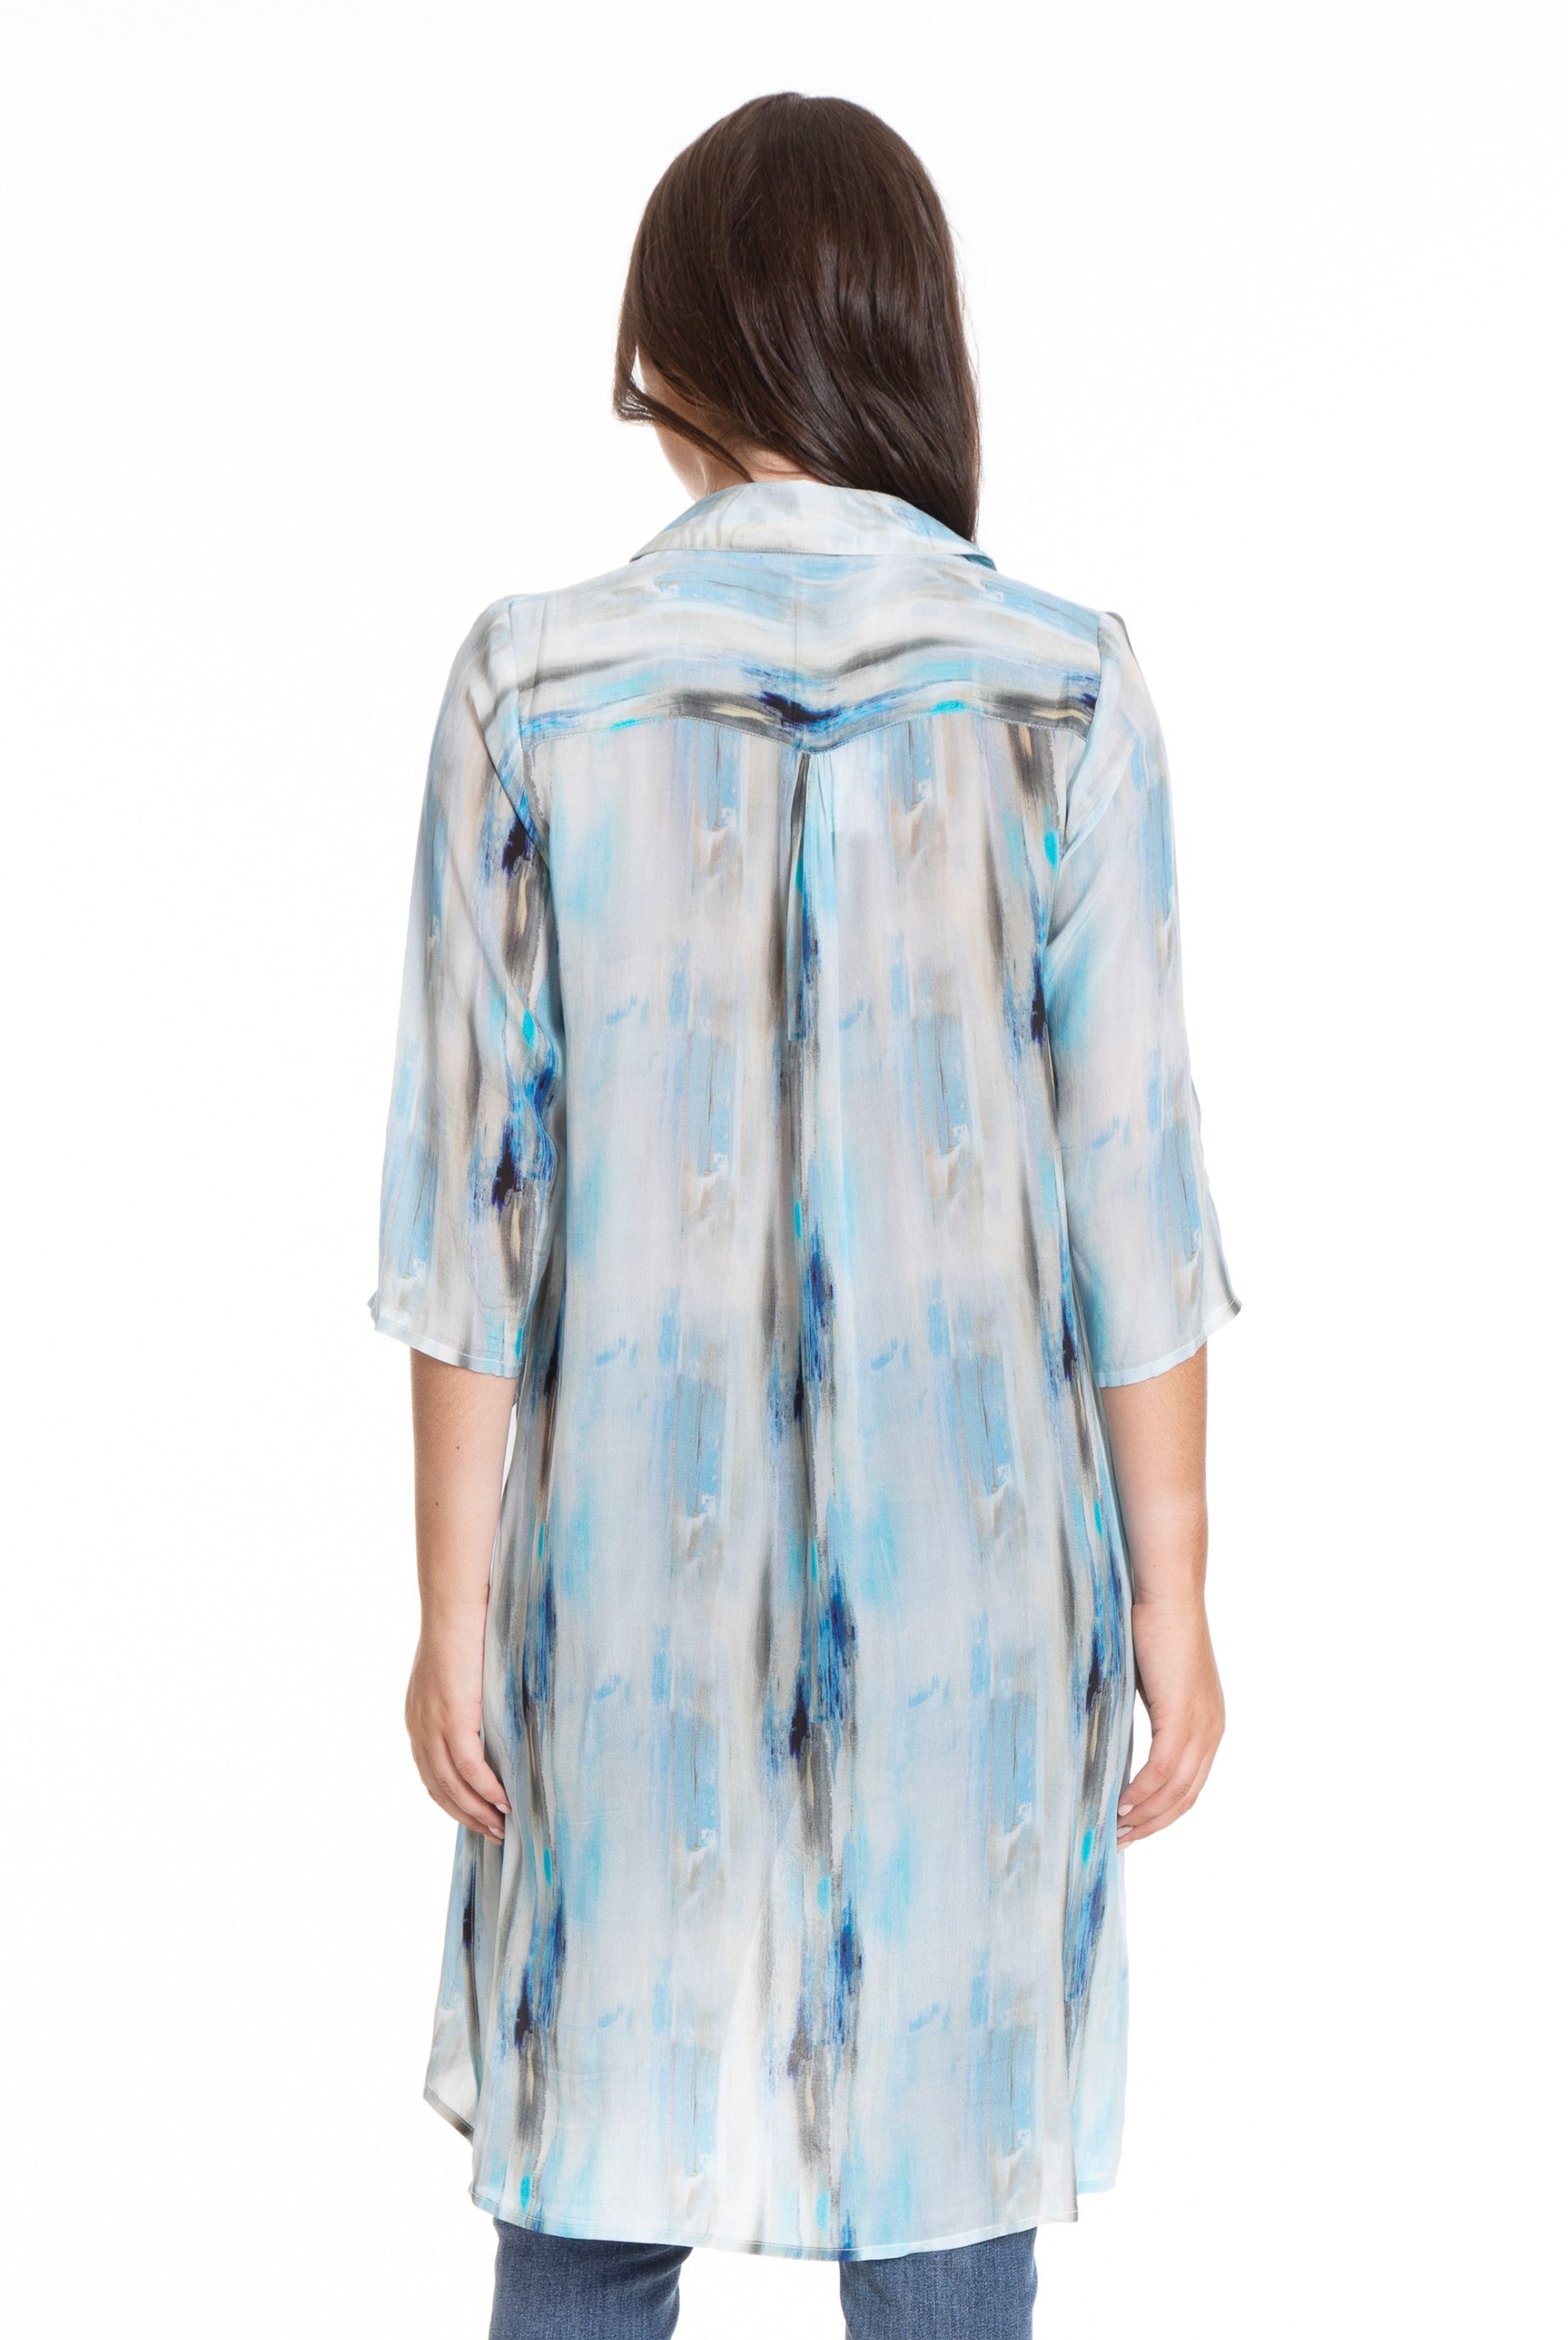 Painterly Strokes - 3⁄4 Sleeve Button-Up with Side Slits Back APNY